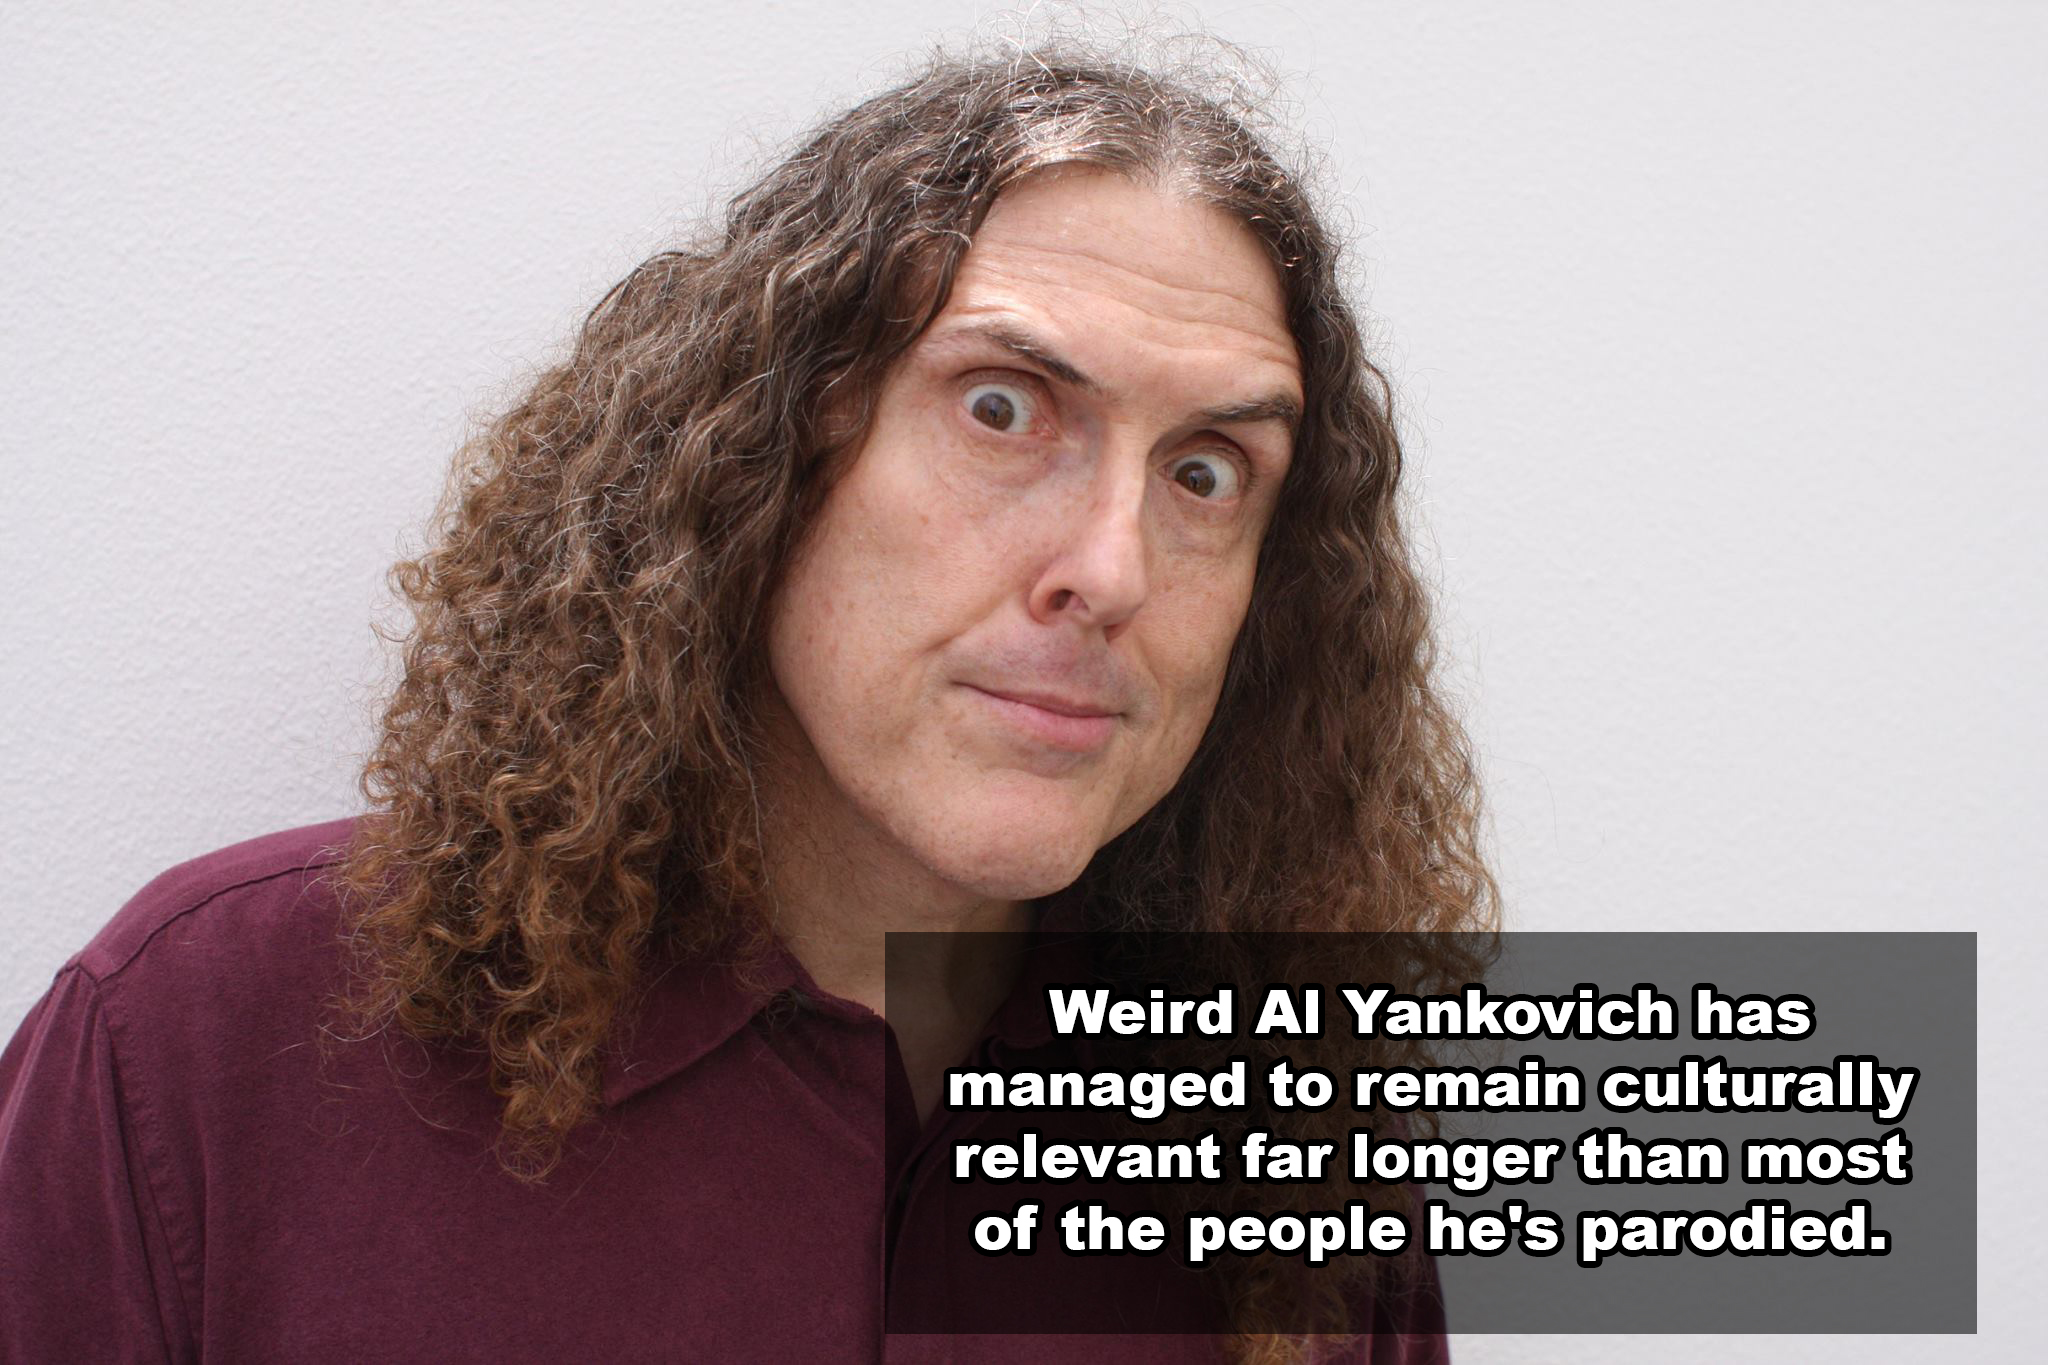 weird al yankovic - Weird Al Yankovich has managed to remain culturally relevant far longer than most of the people he's parodied.